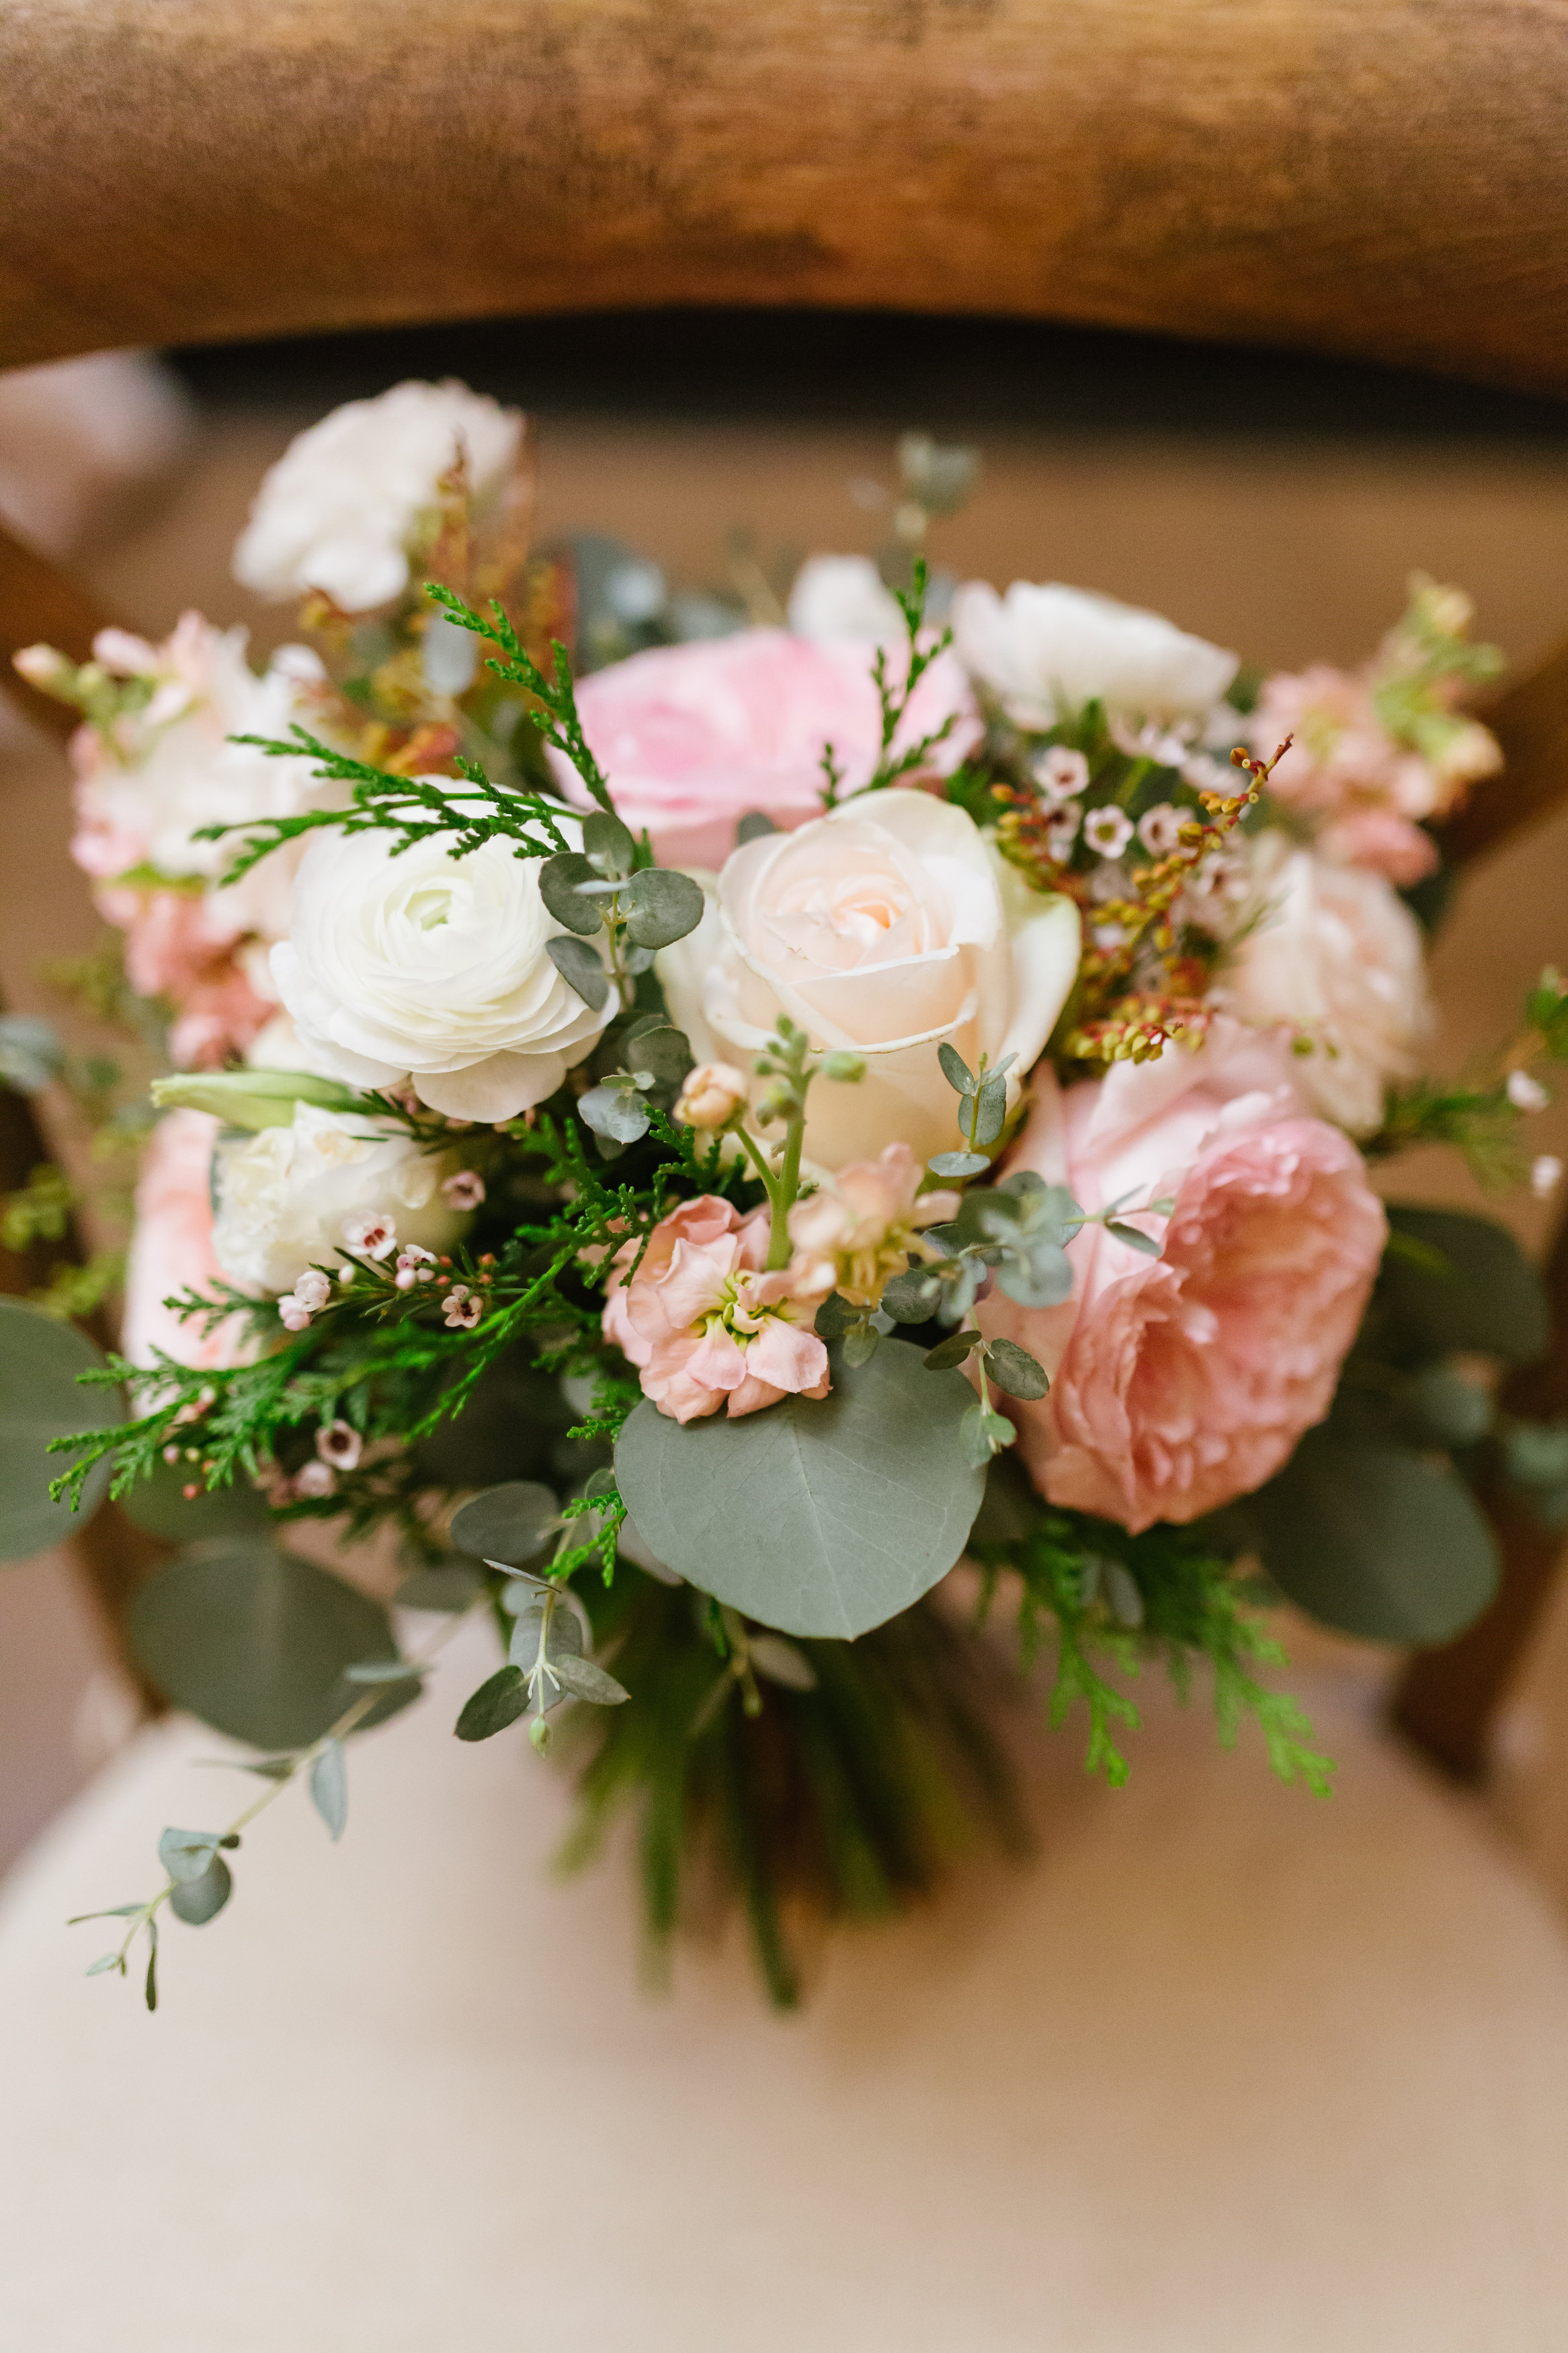 Bridal bouquet with David Austin garden roses and ranunculus